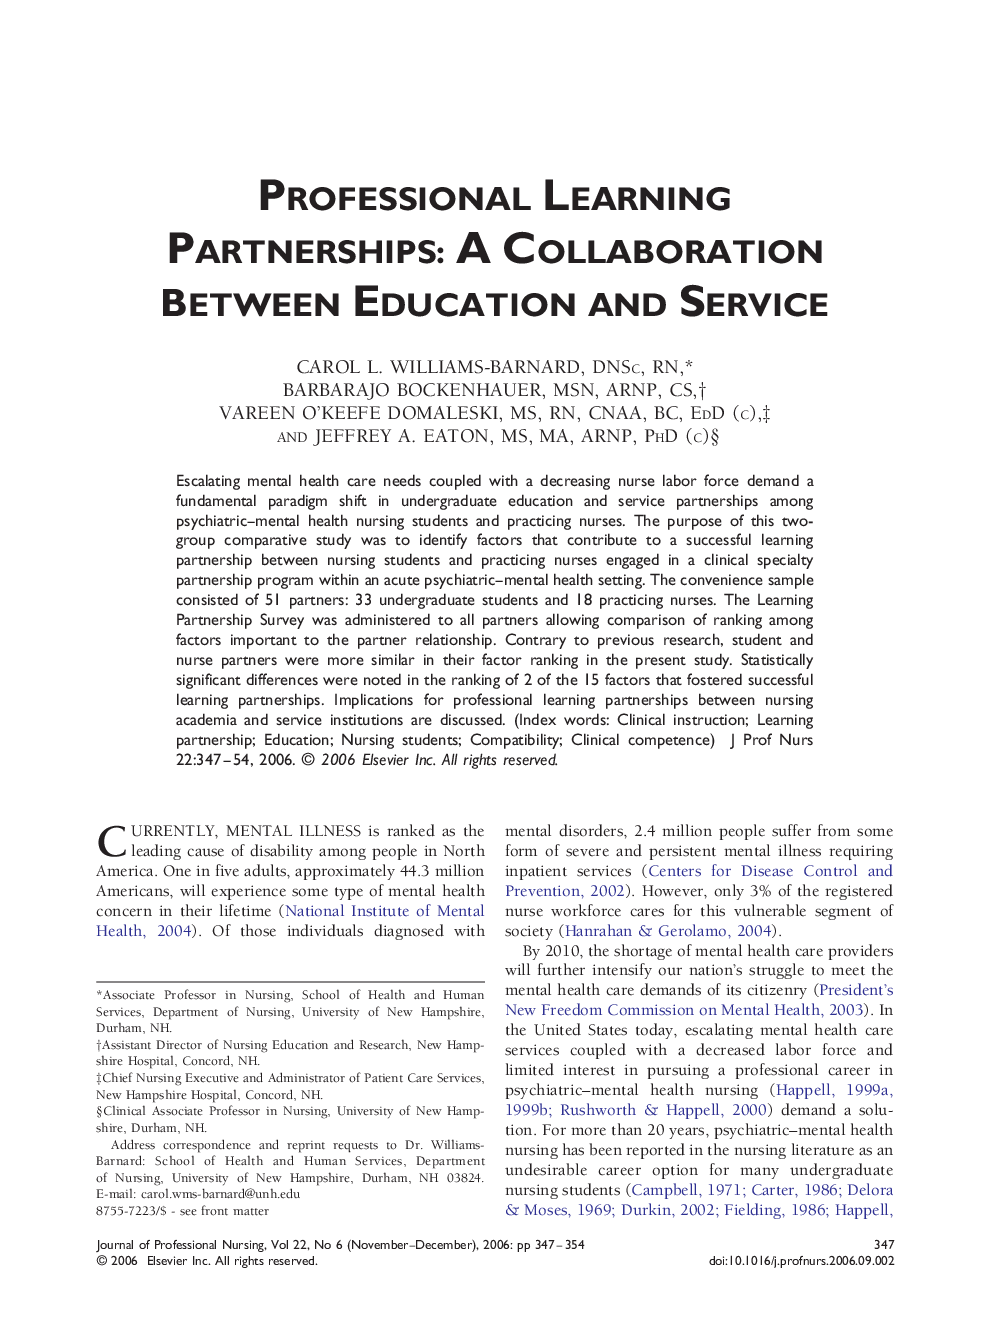 Professional Learning Partnerships: A Collaboration Between Education and Service